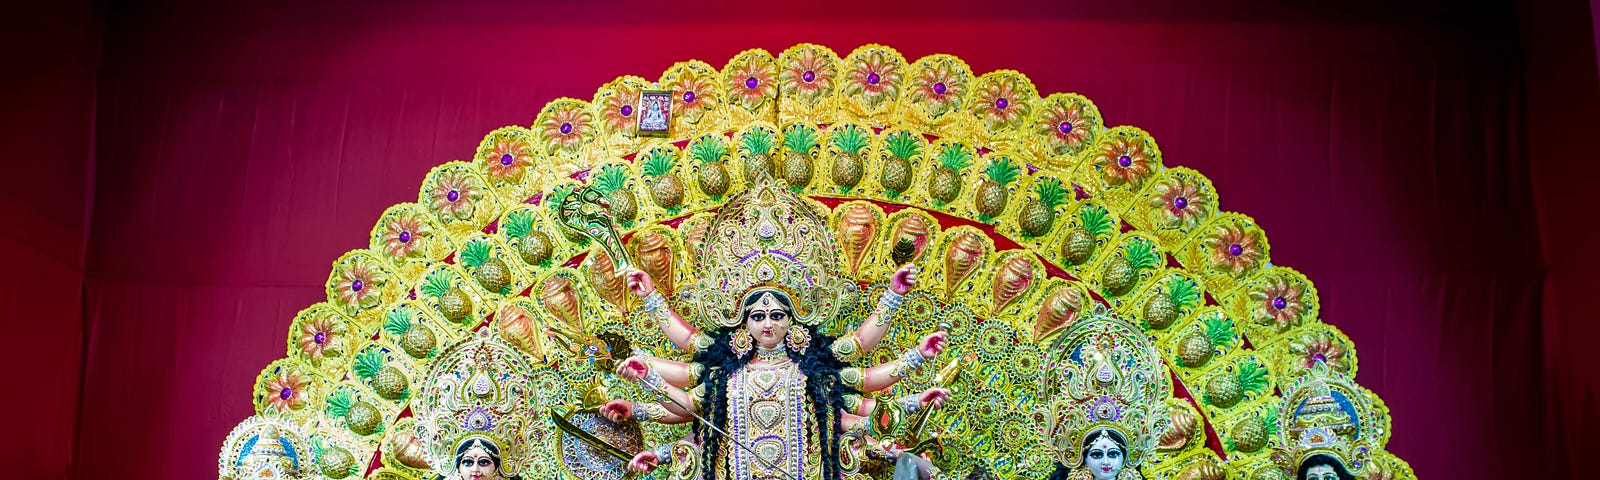 An Indian Goddess against a colorful backdrop with her 4 children standing on either side of her.